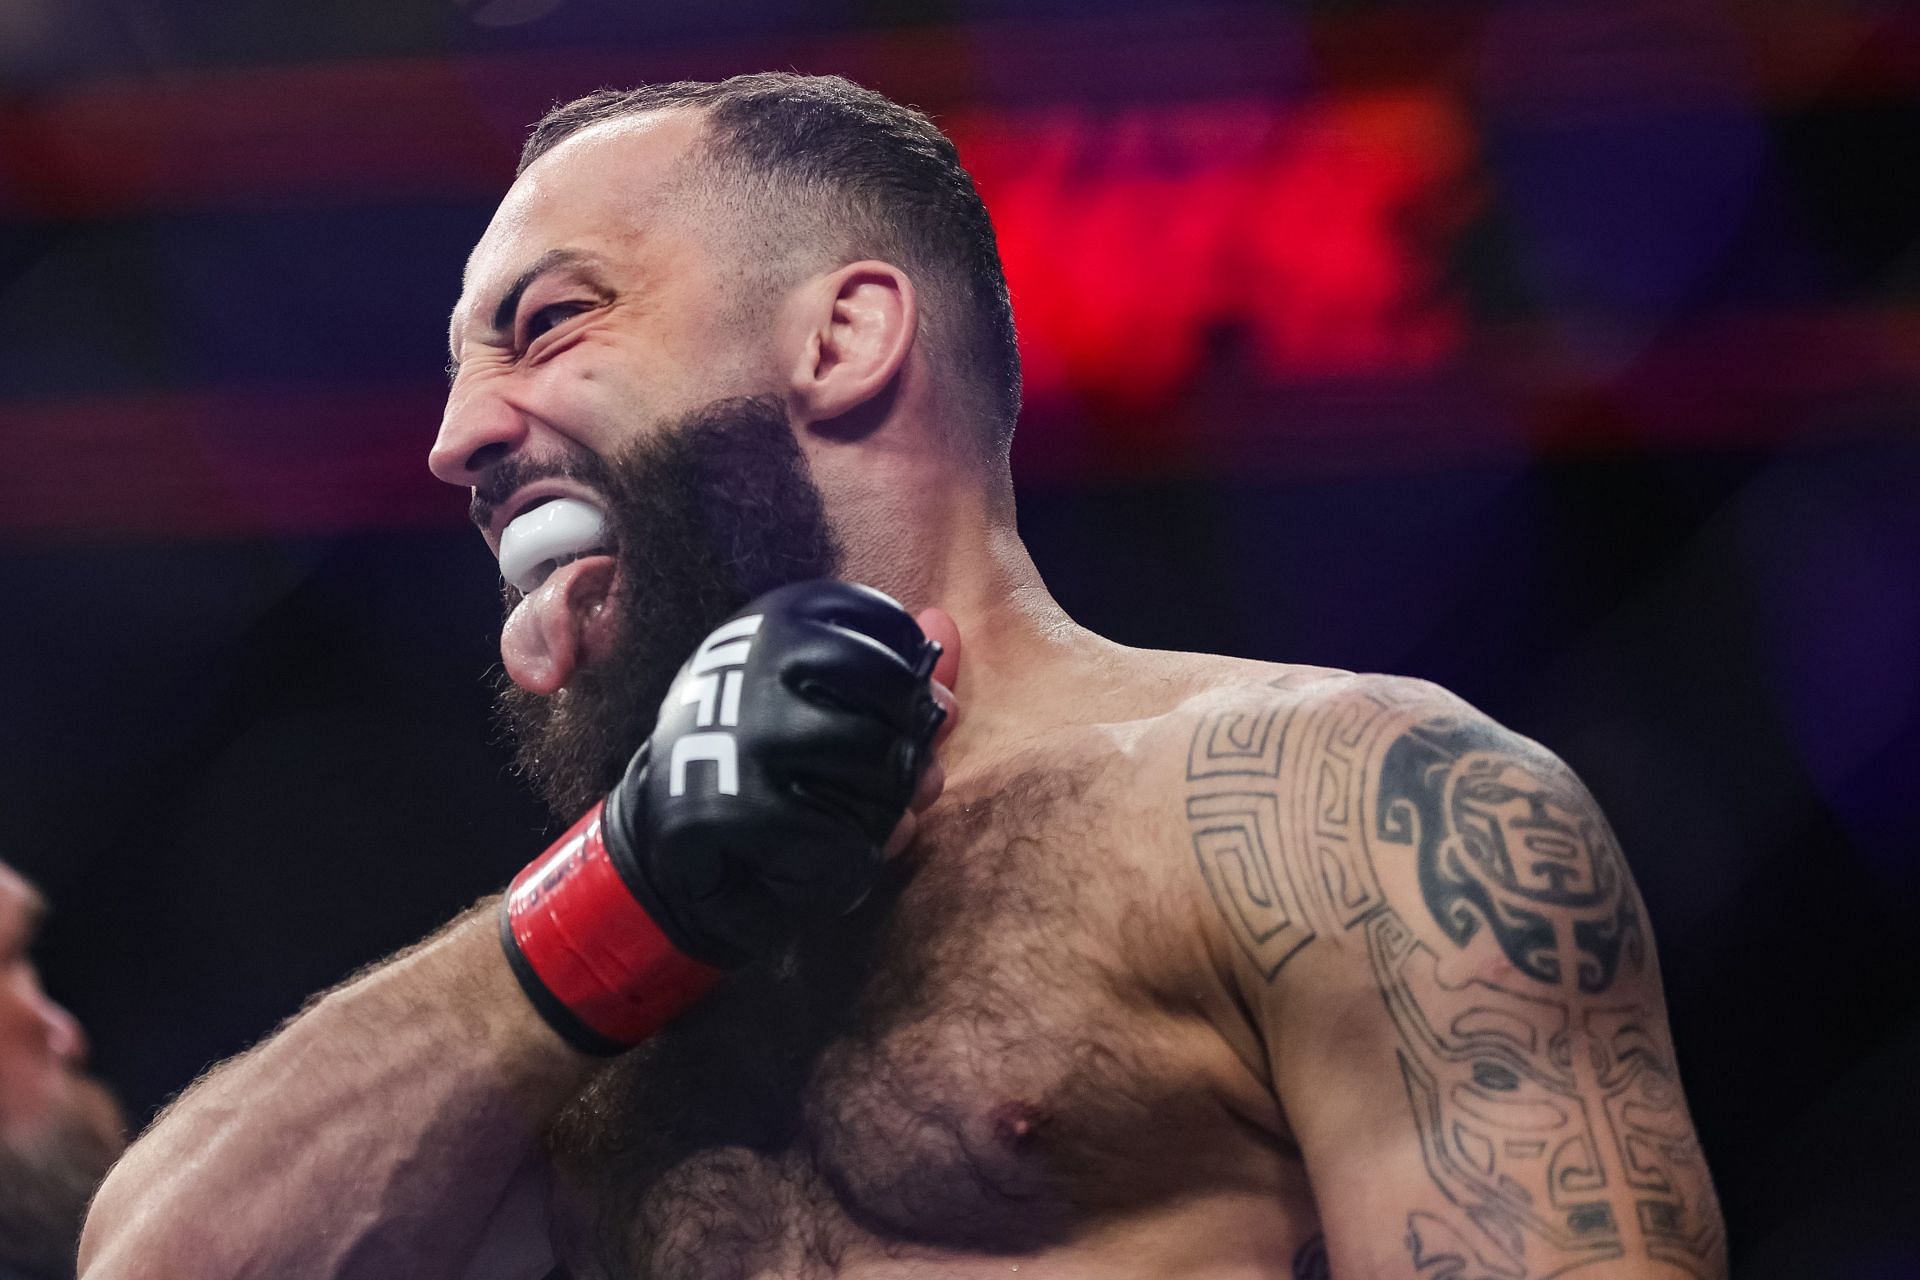 Roman Dolidze will look for the biggest win of his career this weekend